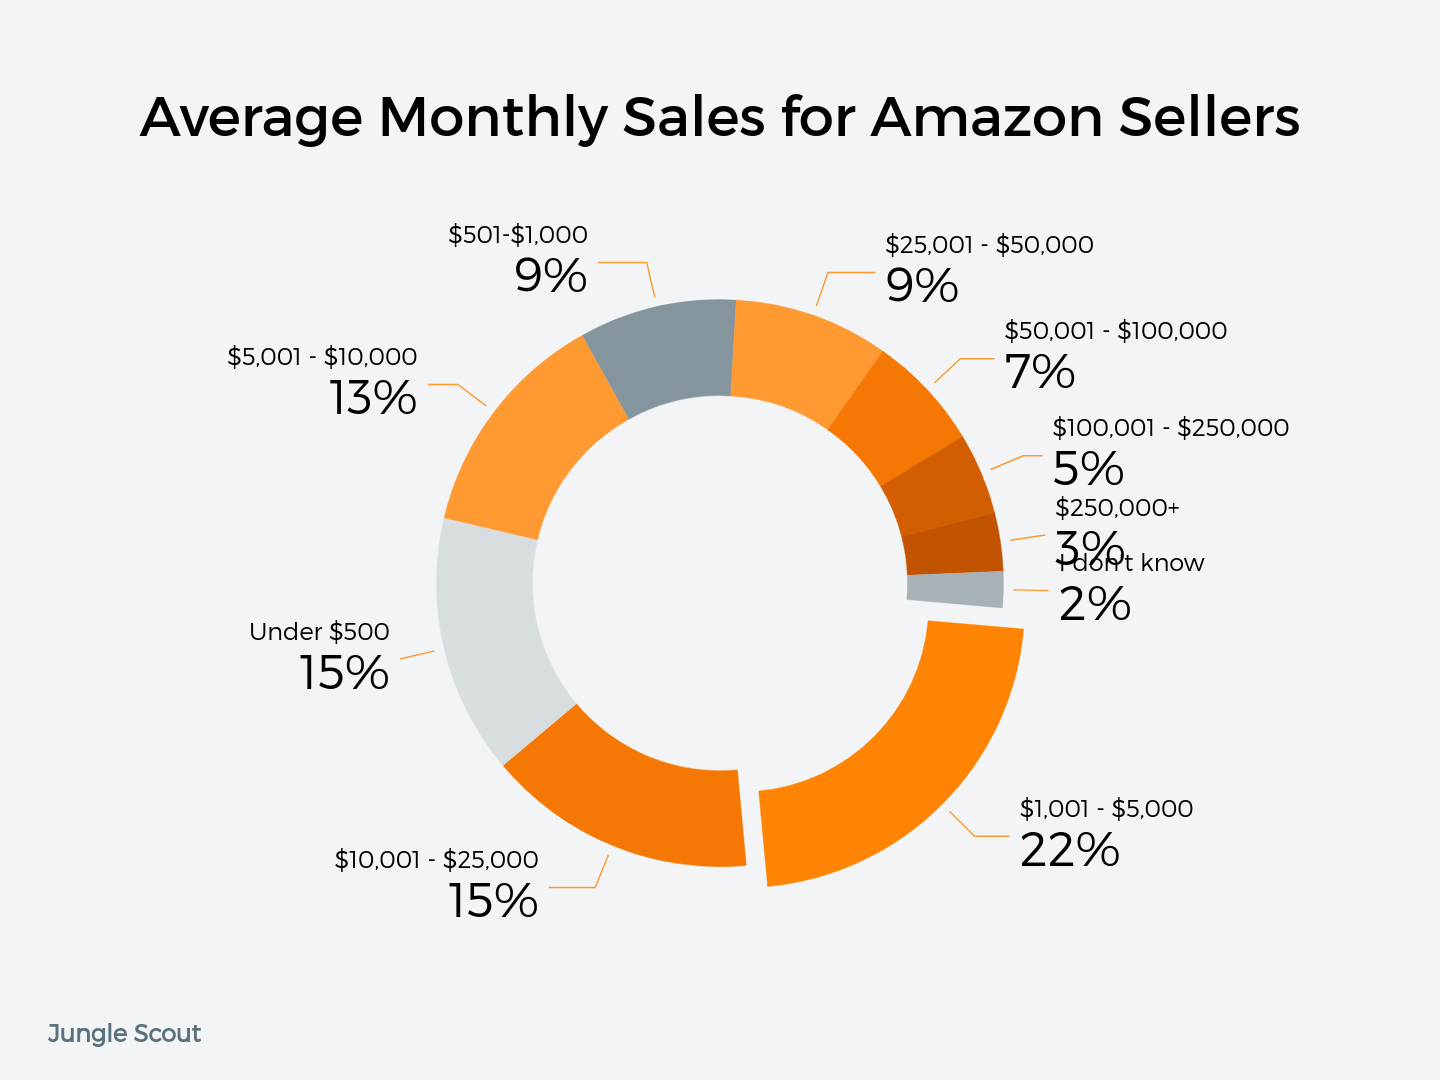 How Much Money Does The Average Amazon Seller Make